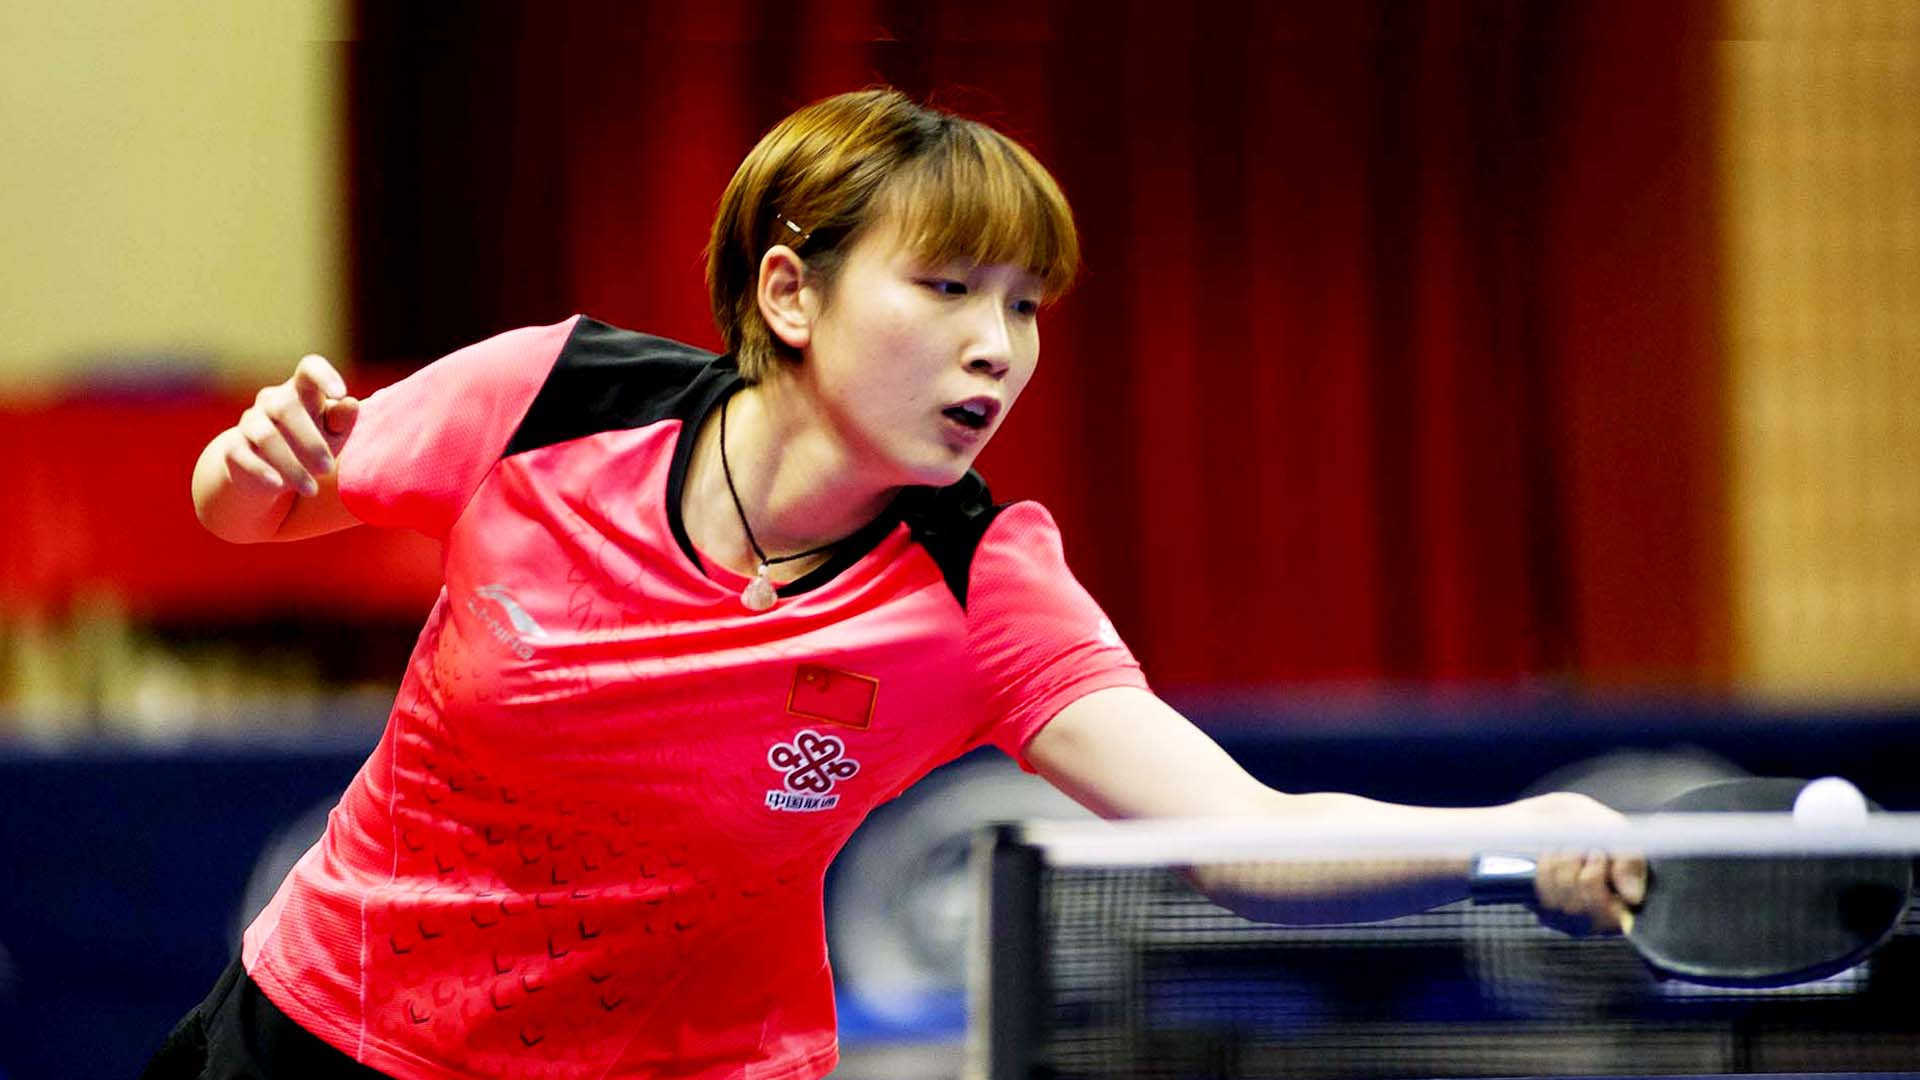 Qian Tianyi is second seed in the girls' singles at the 2018 World Junior Table Tennis Championships in Bendigo ©ITTF